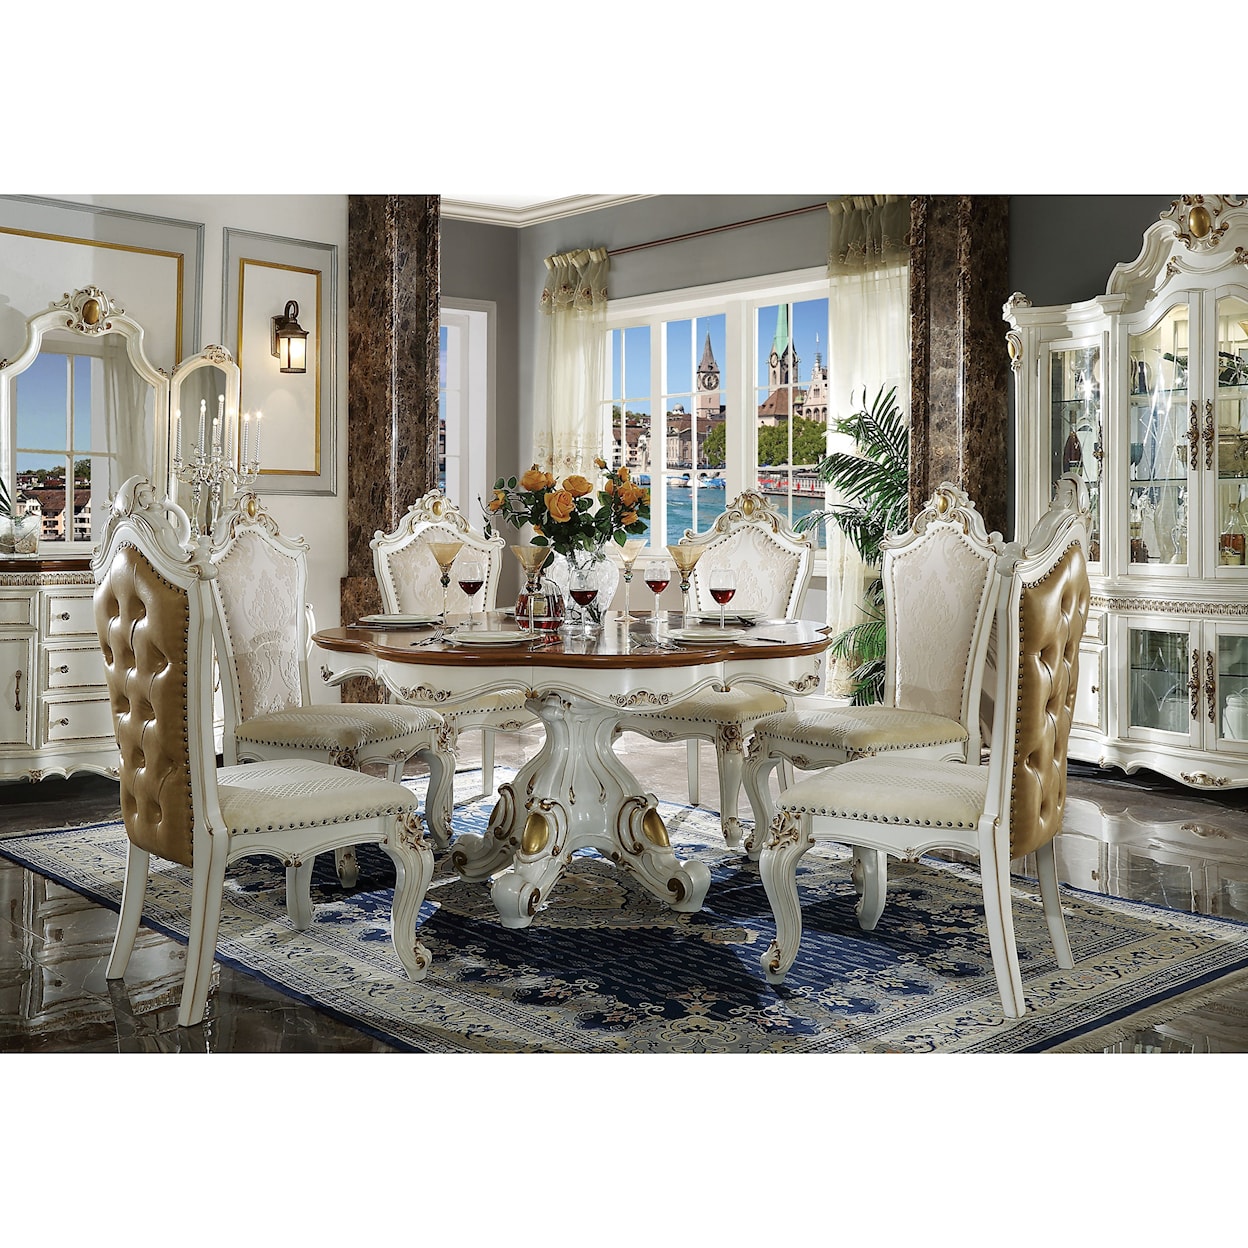 Acme Furniture Picardy Formal Dining Group